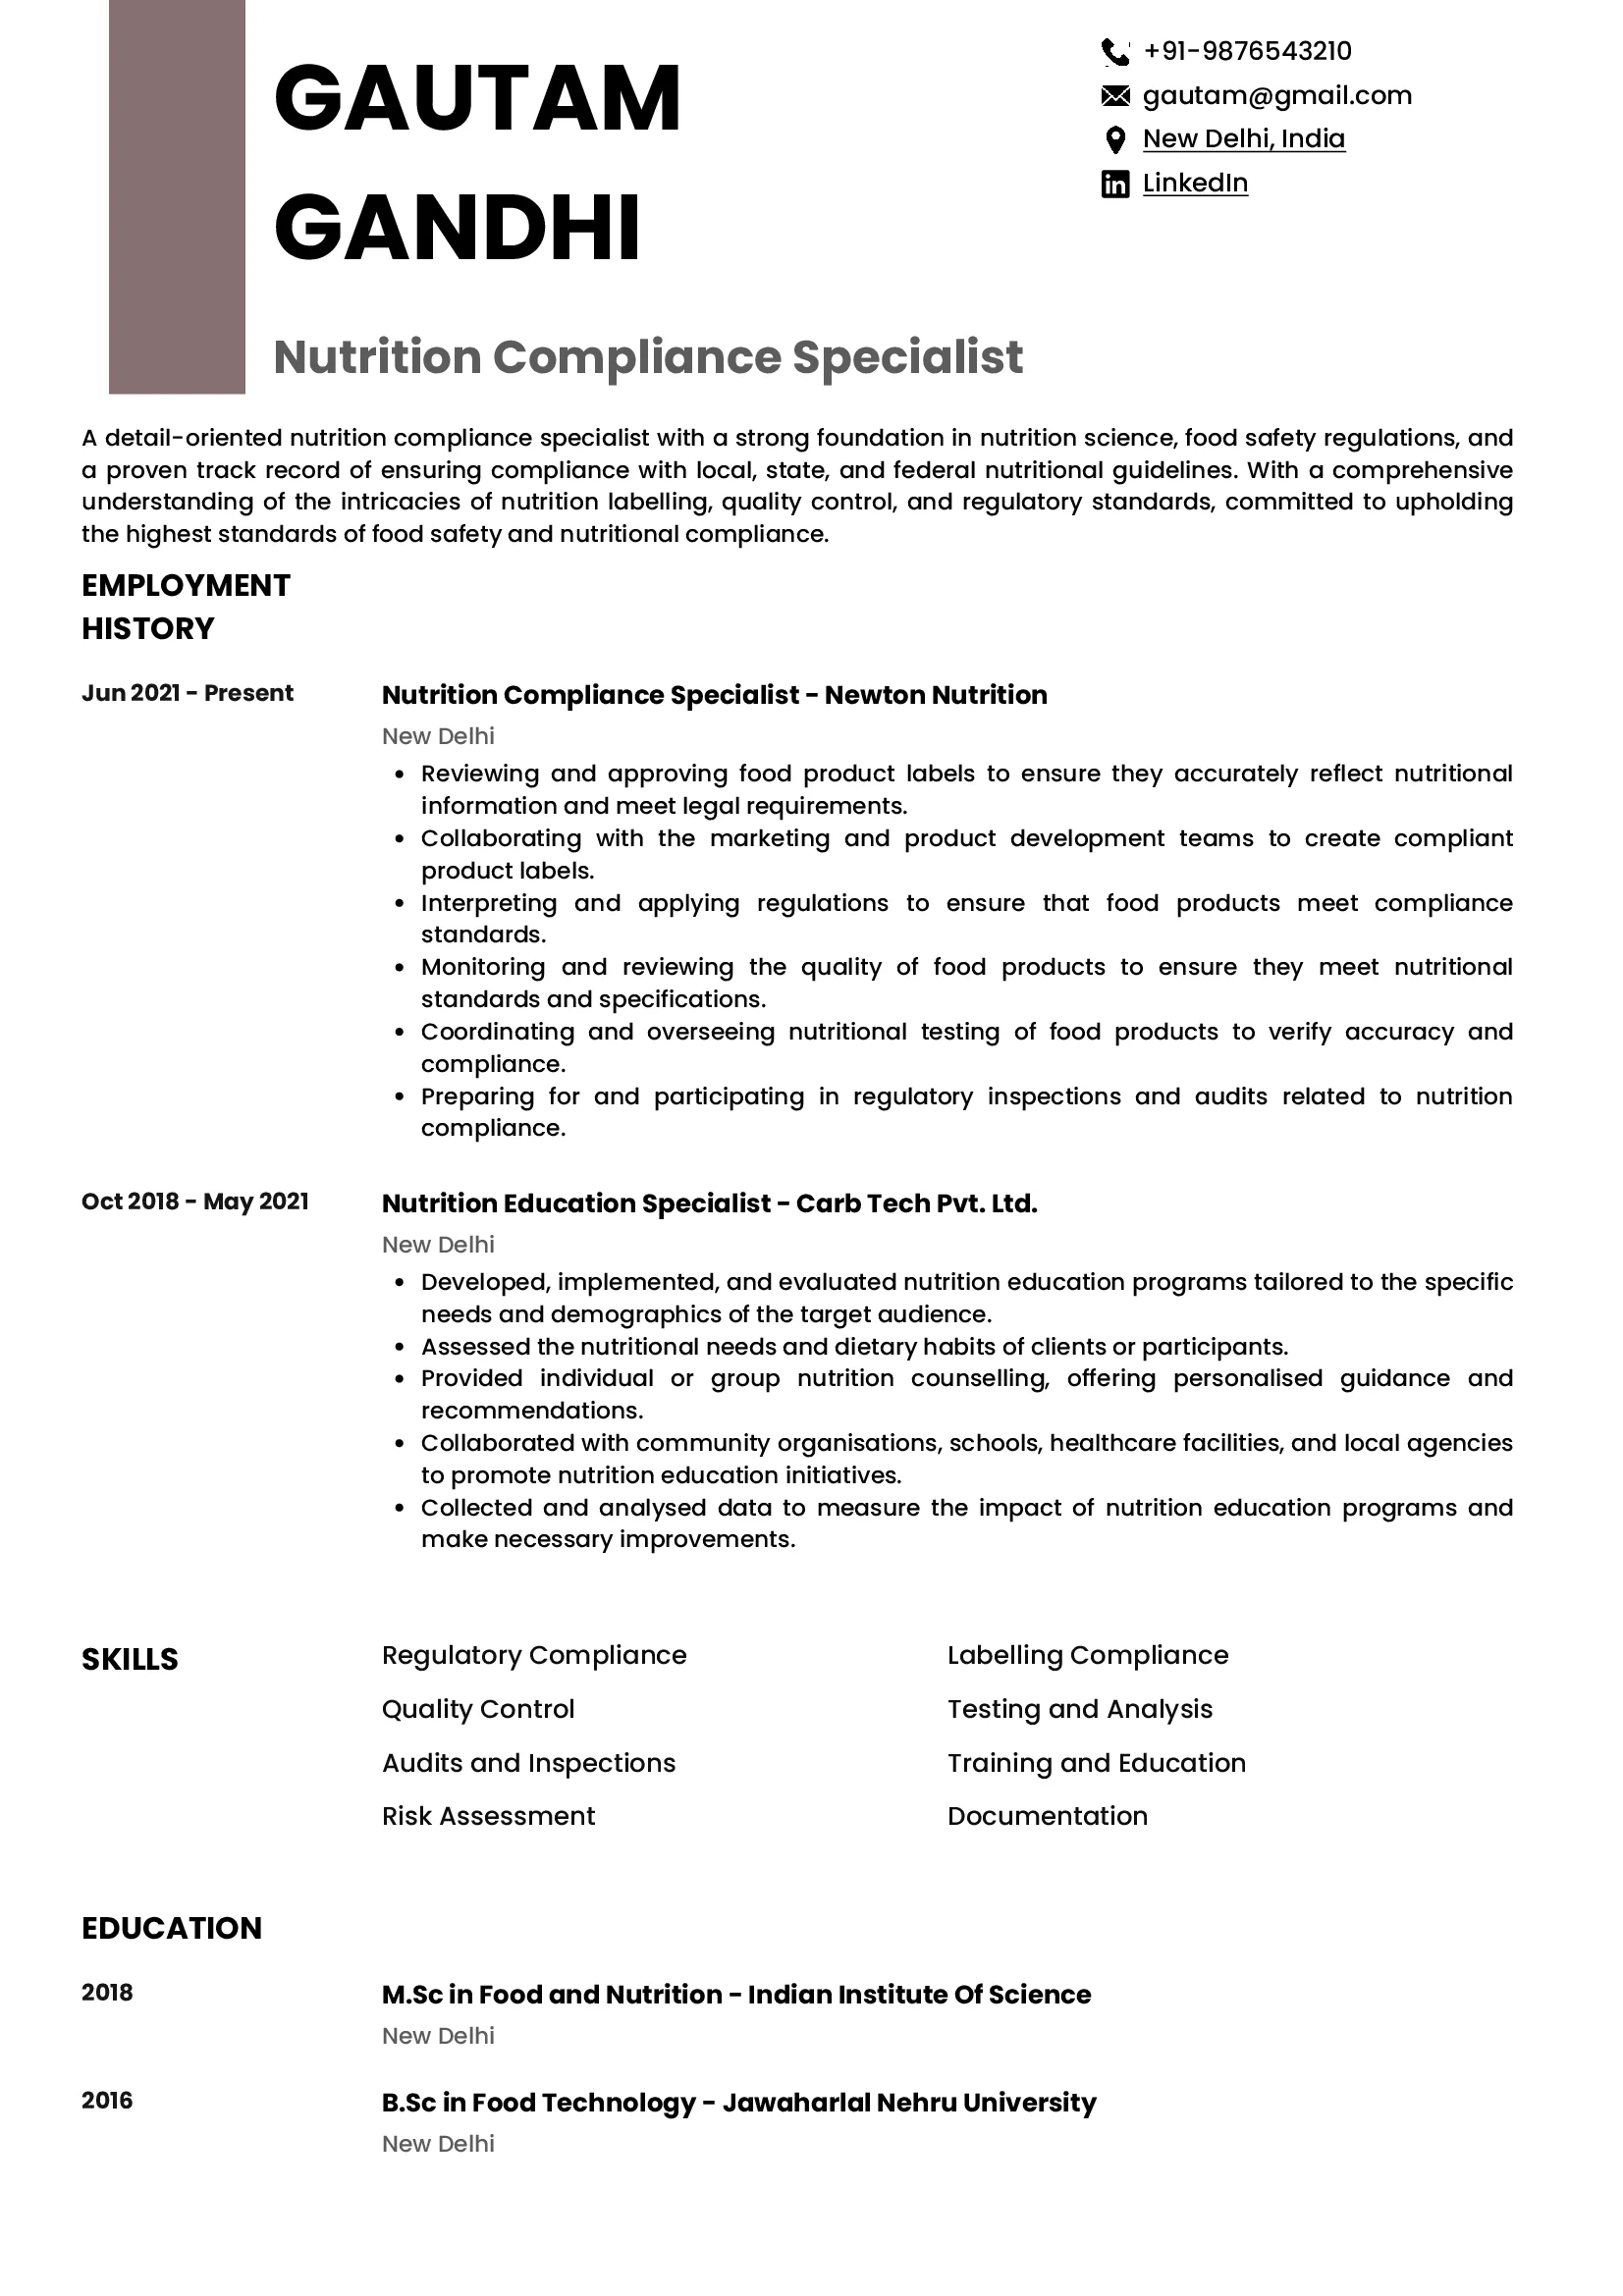 Sample Resume of Nutrition Compliance Specialist | Free Resume Templates & Samples on Resumod.co